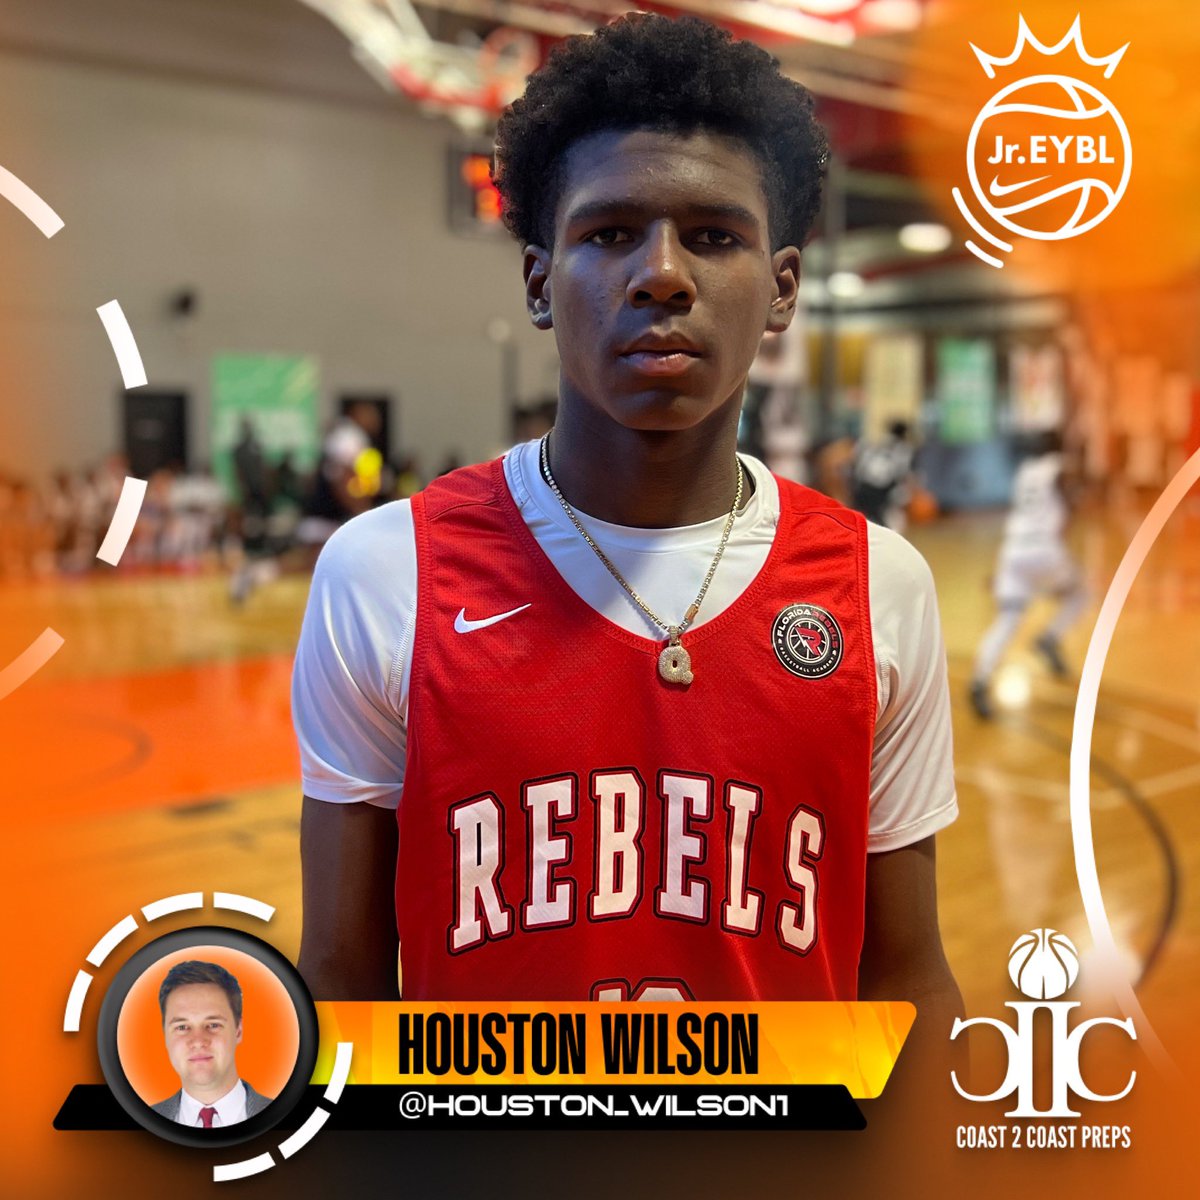 @NikeEYB @Coast2CoastPrep 2028 Quinton Wilson has significantly improved his stock so far this Spring and he showed no signs of slowing down today in Winston-Salem at the Nike Jr. @NikeEYB Southeast Region Session 1. Multiple above the rim finishes in a dominating win for Florida Rebels.